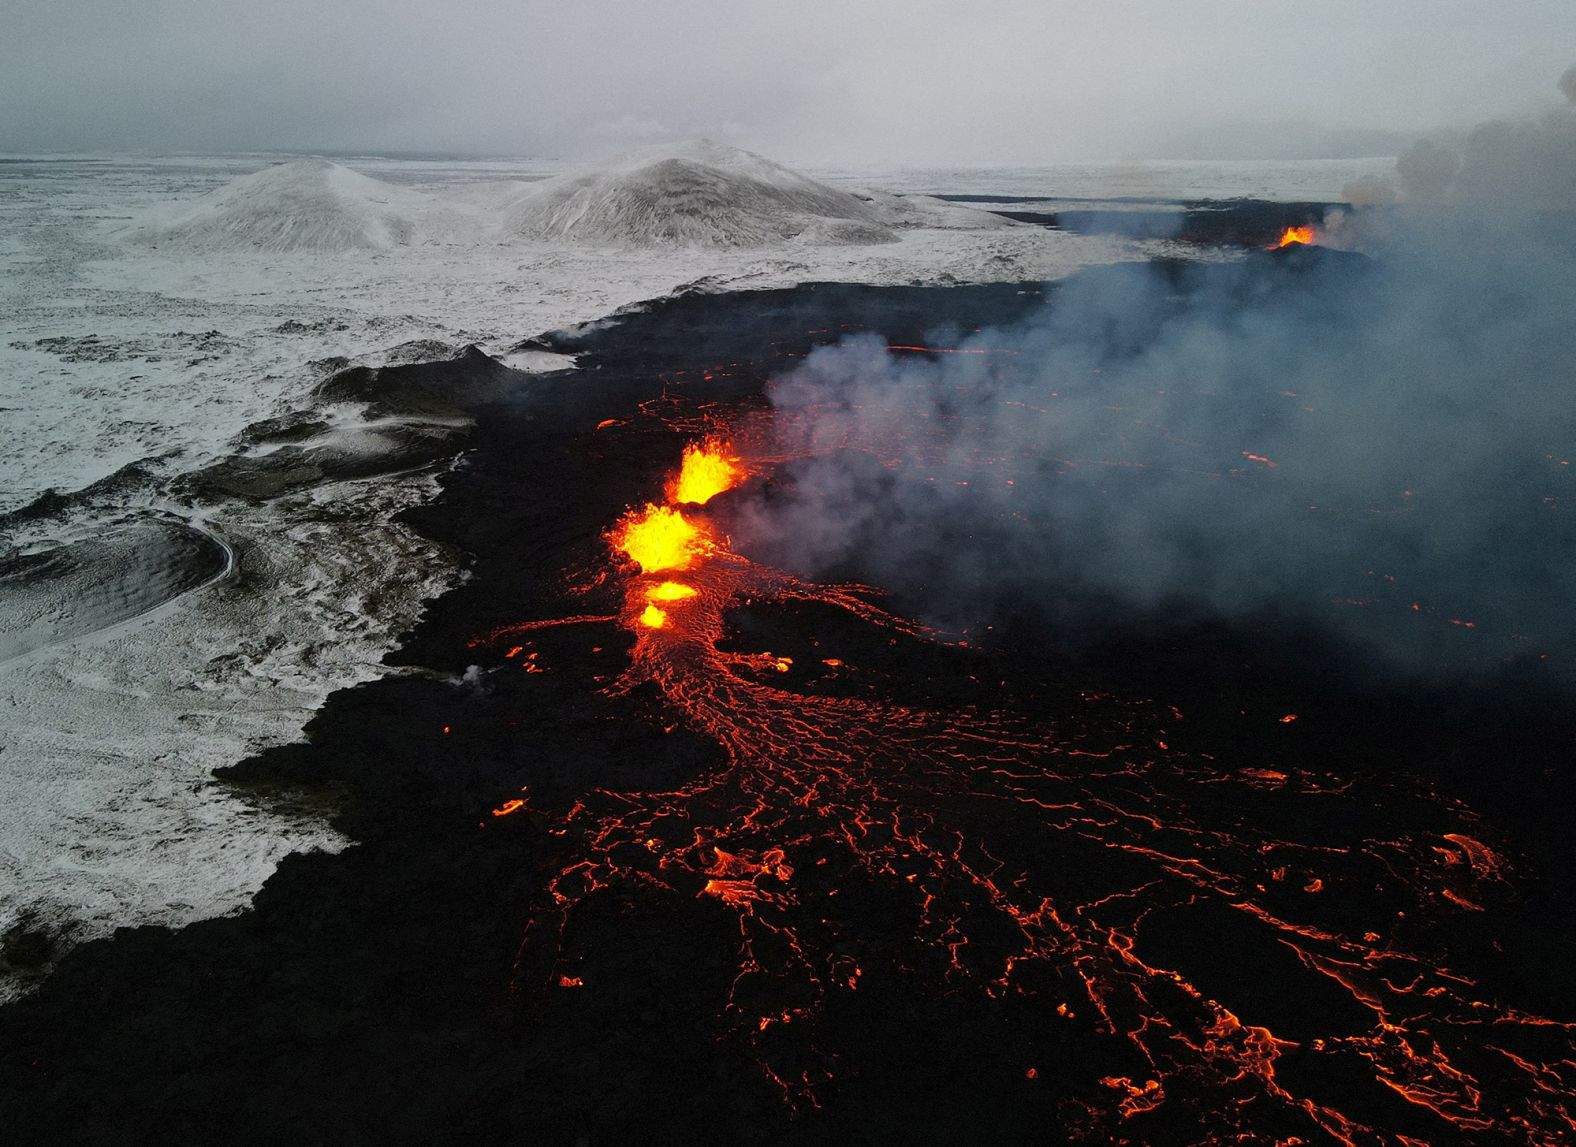 A drone picture shows lava spewing from the site of the volcanic eruption north of Grindavik, on December 19.